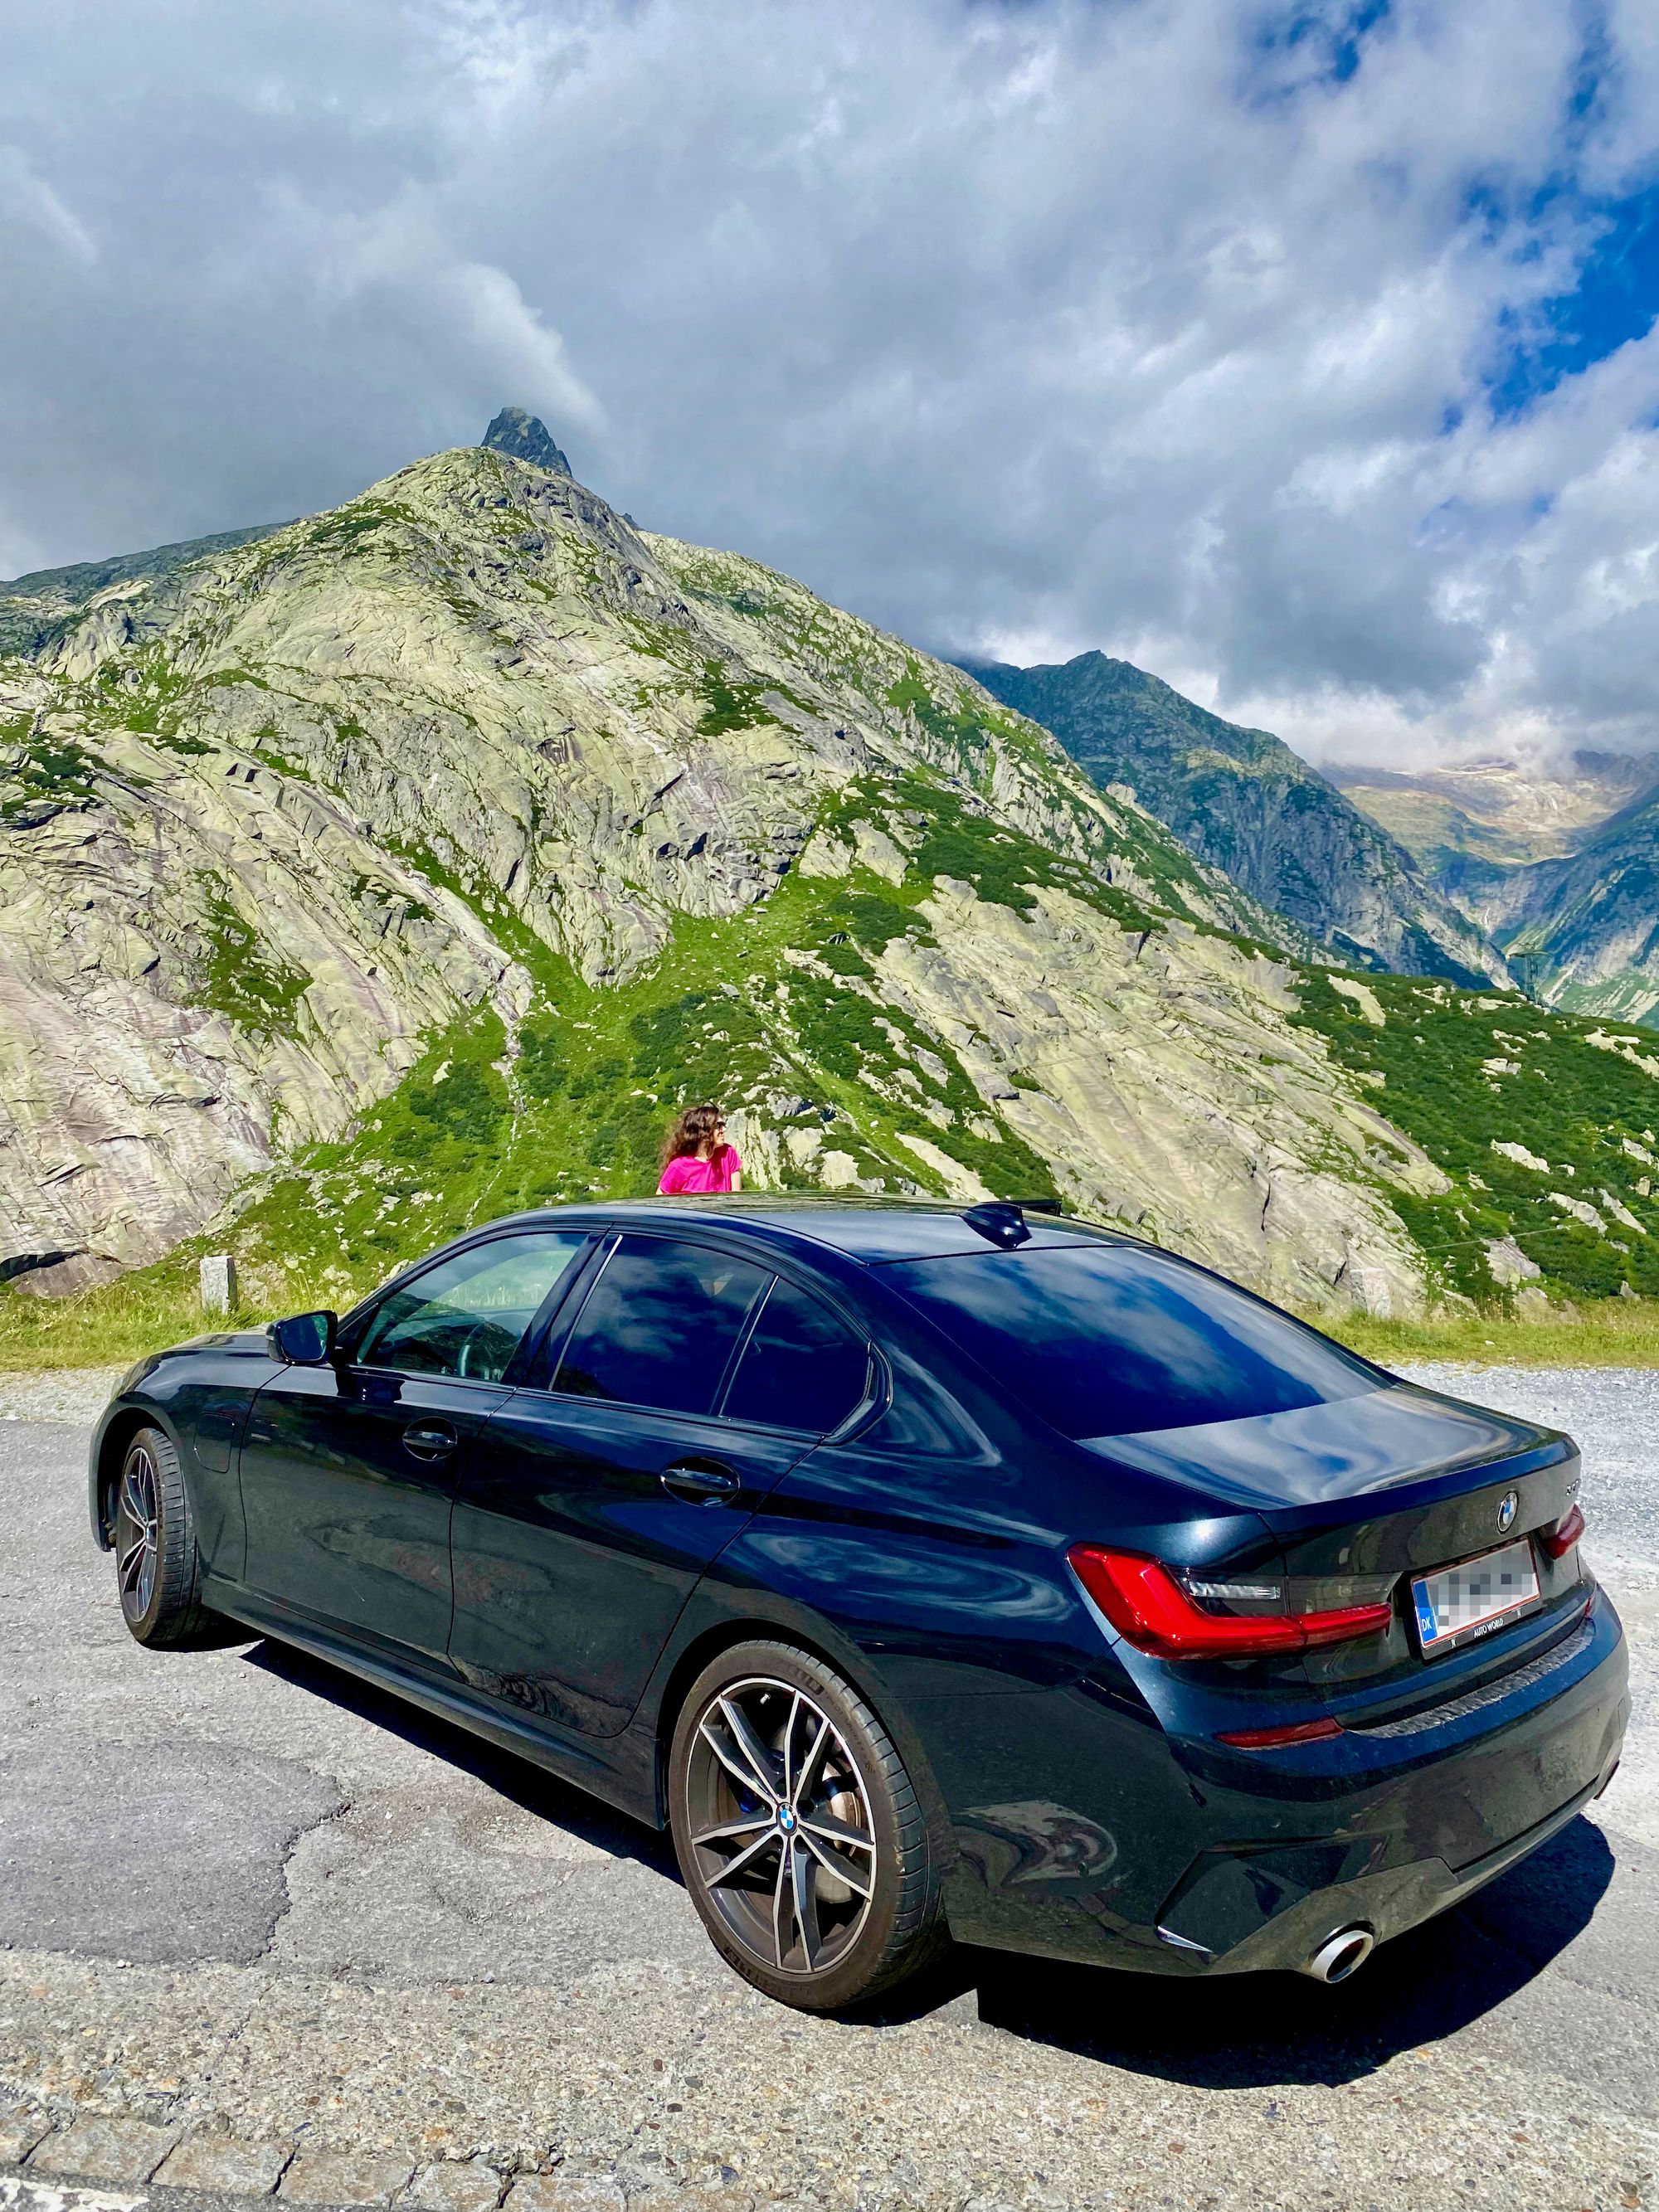 Silvia and our car resting at the Grimsel Pass